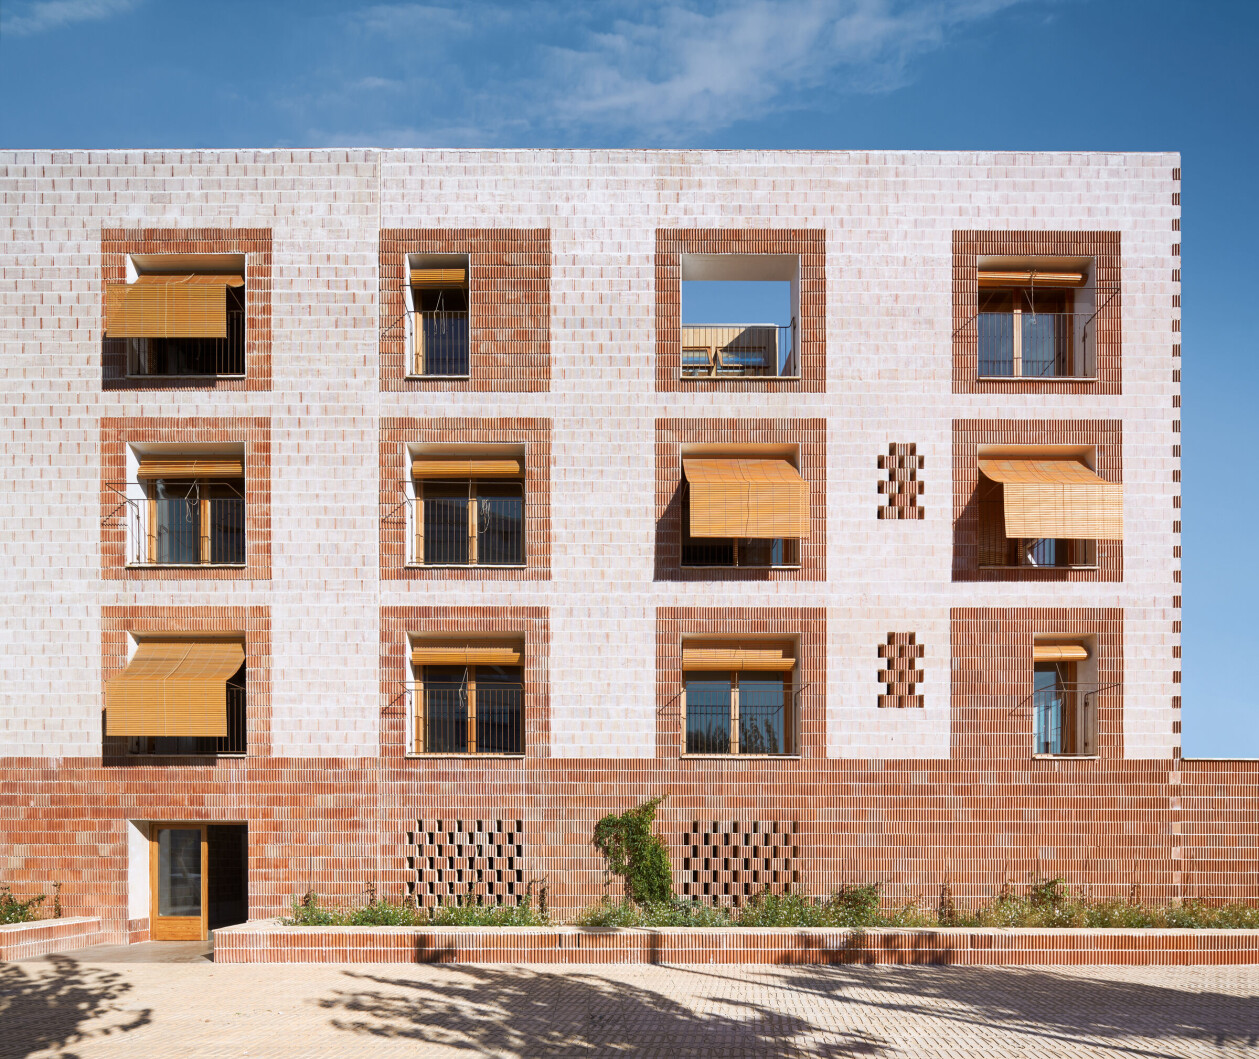 Housing project in Ibiza by 08014 makes use of earth-filled clay walls for thermal mass